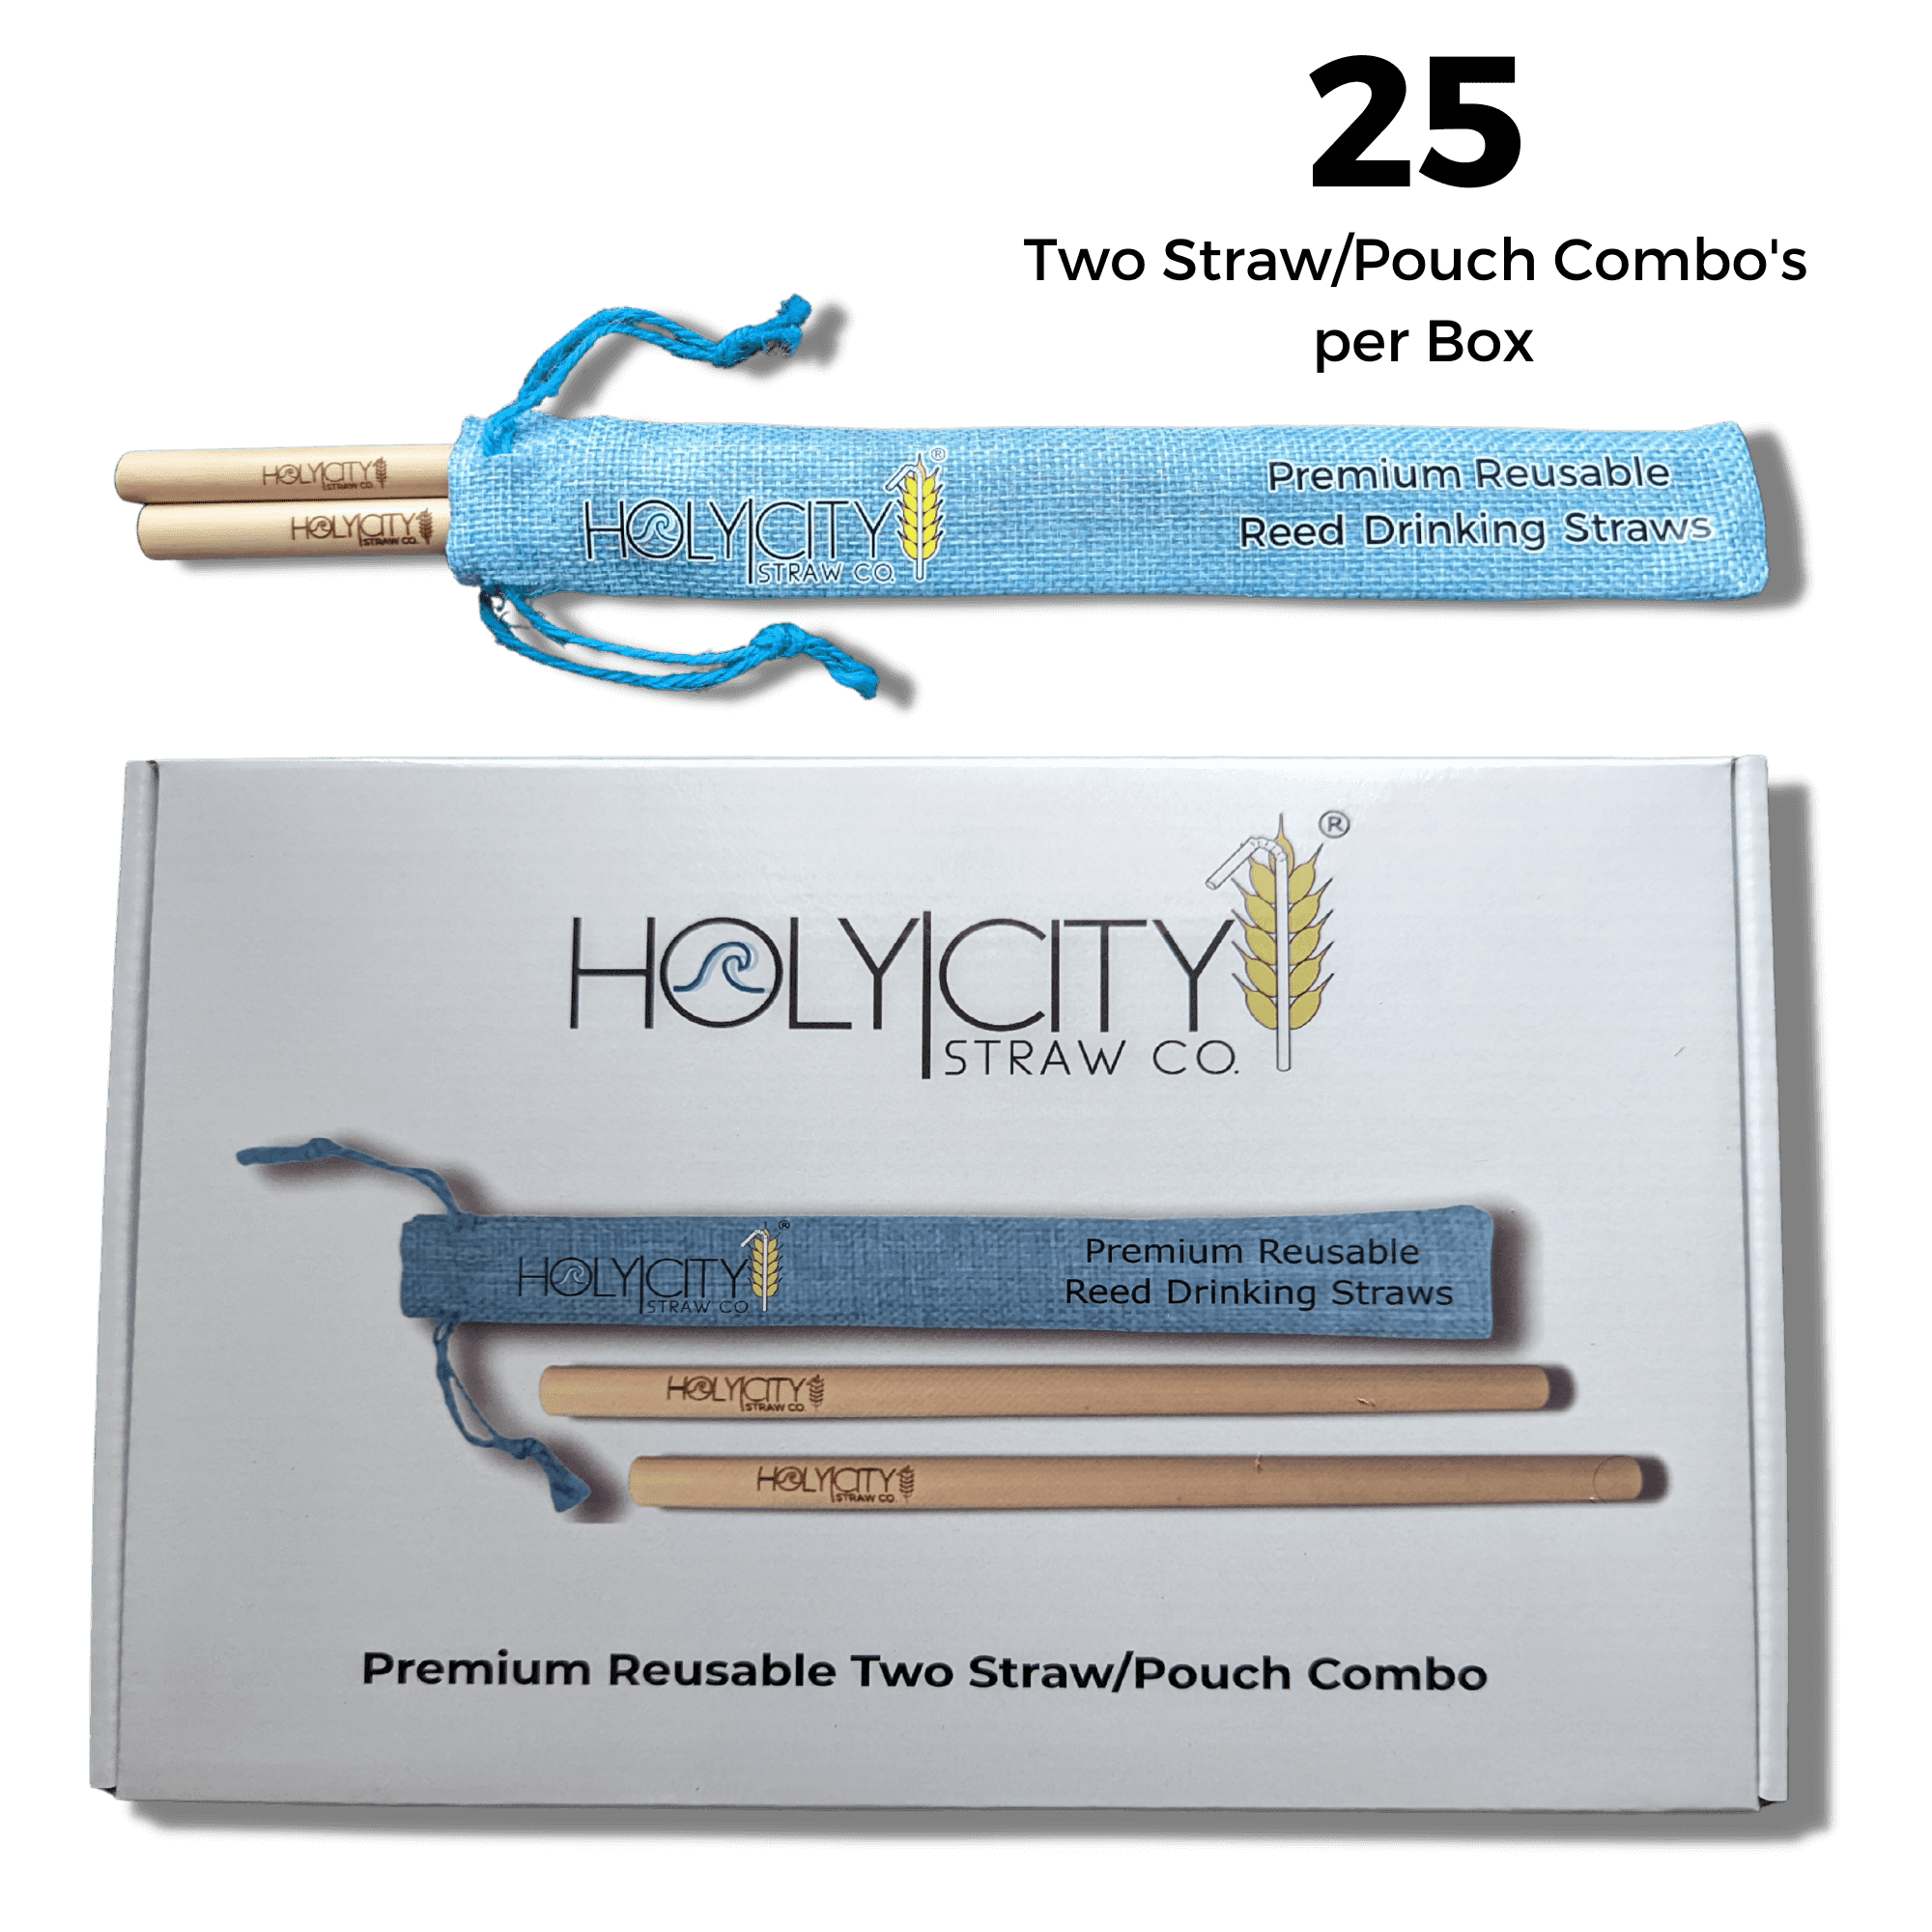 Holy City Straw Company Inner Pack of 25 two straw pouches retail top